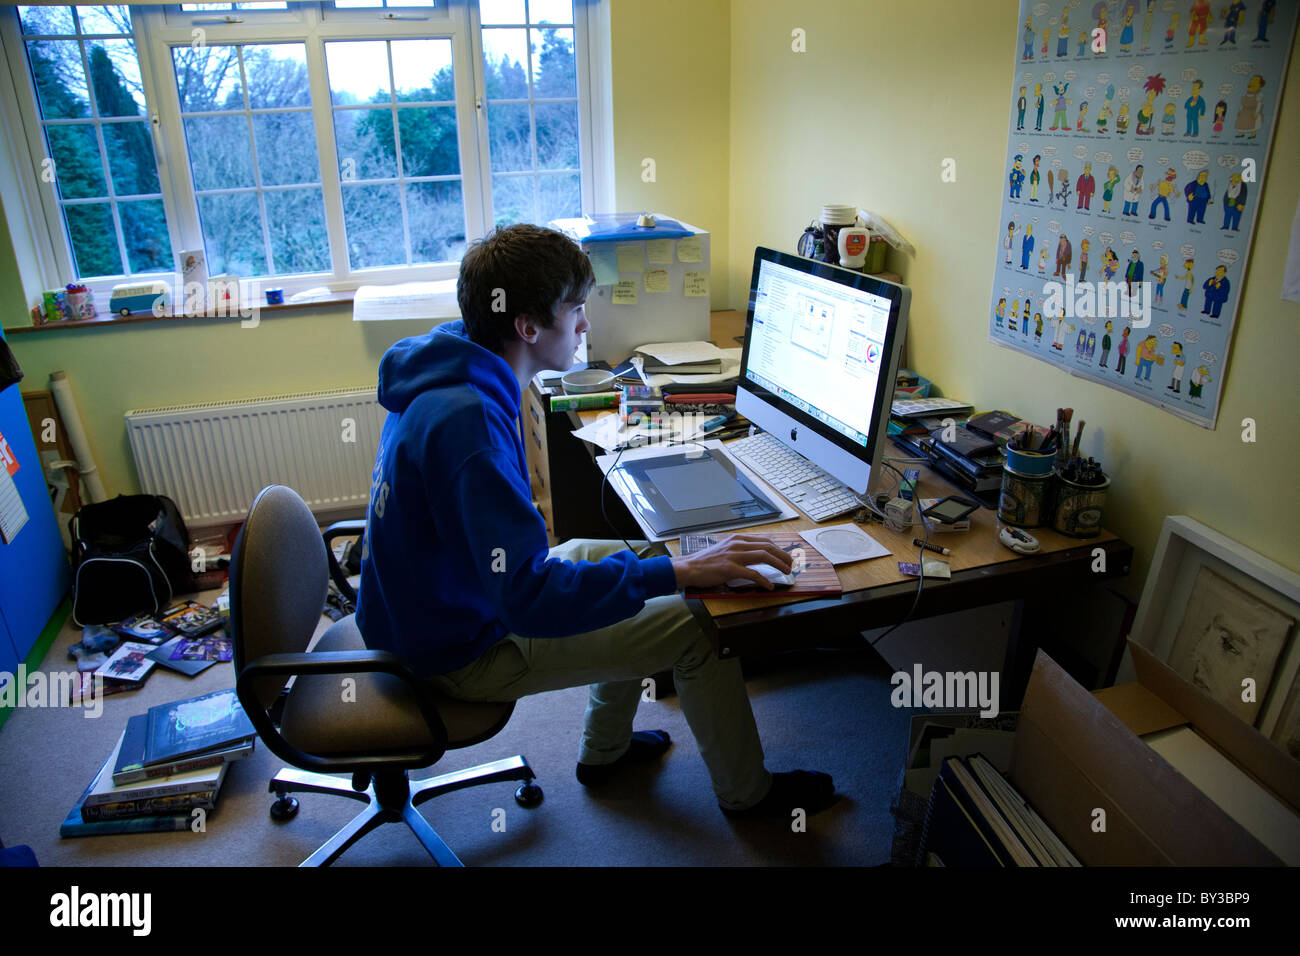 Student working at his desk using an Imac in his untidy bedroom. Stock Photo